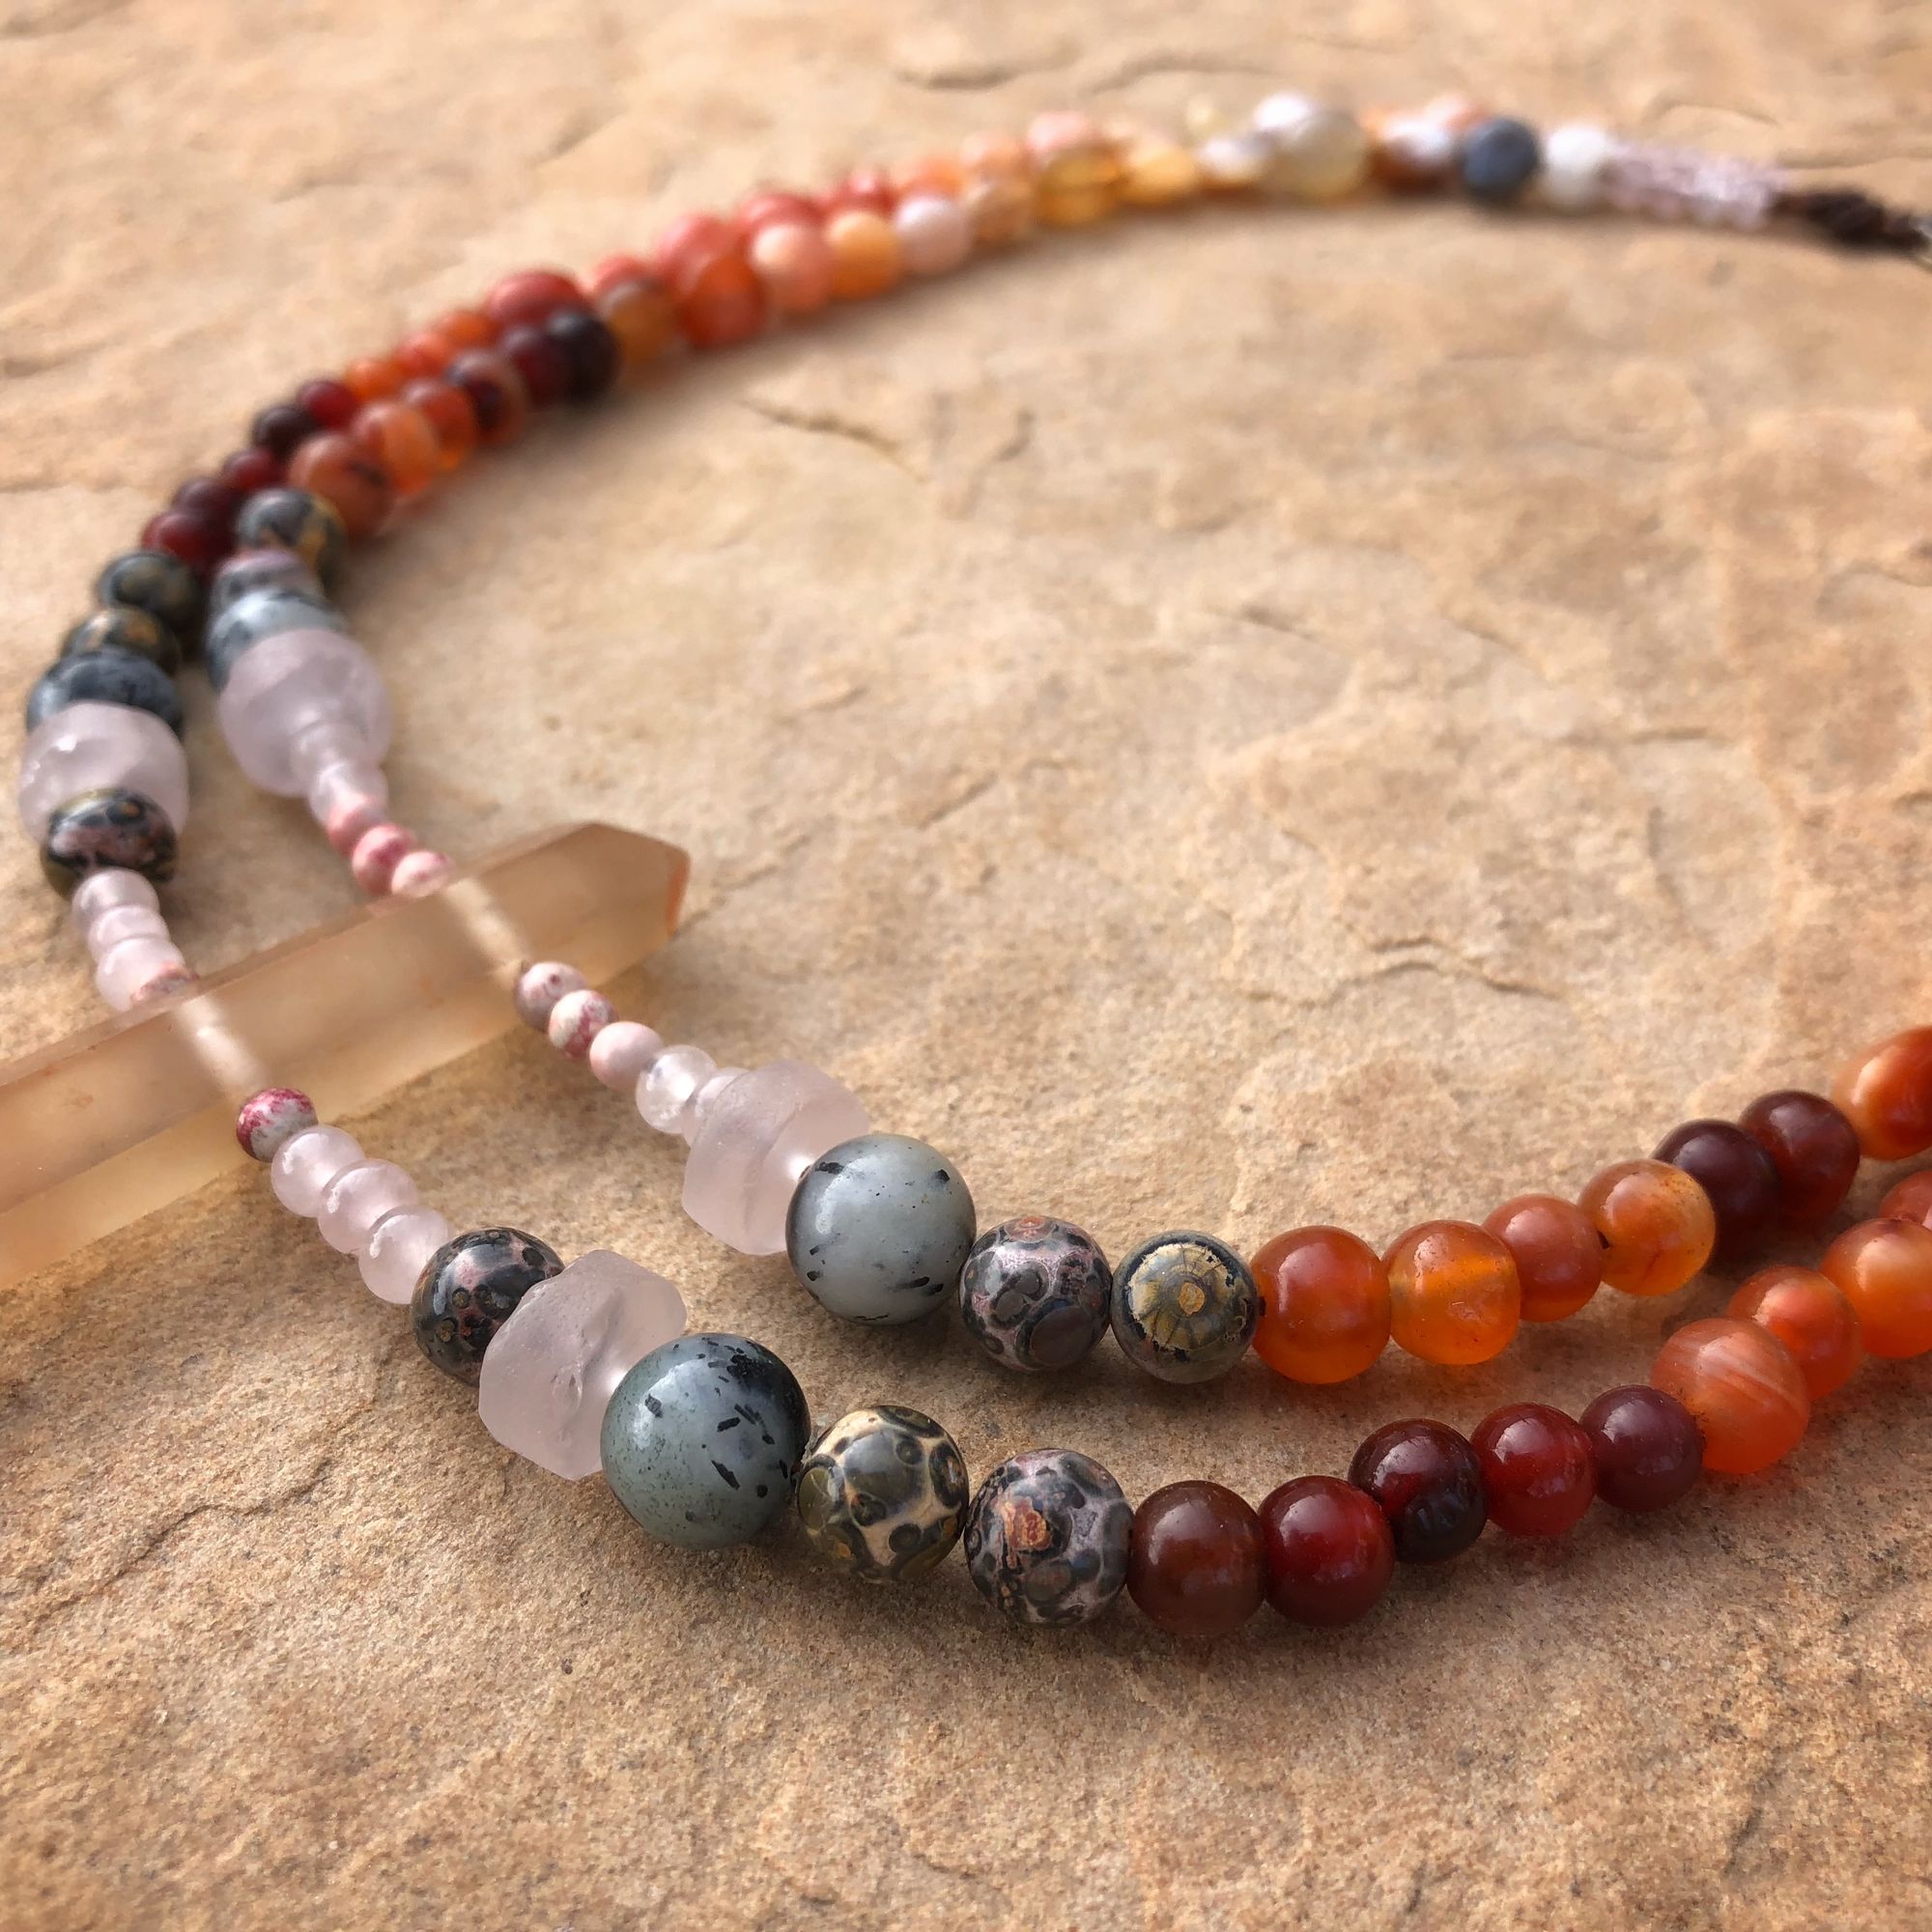 Necklace made of red, grey, orange, yellow and pink semi-precious stones laying on tan sandstone